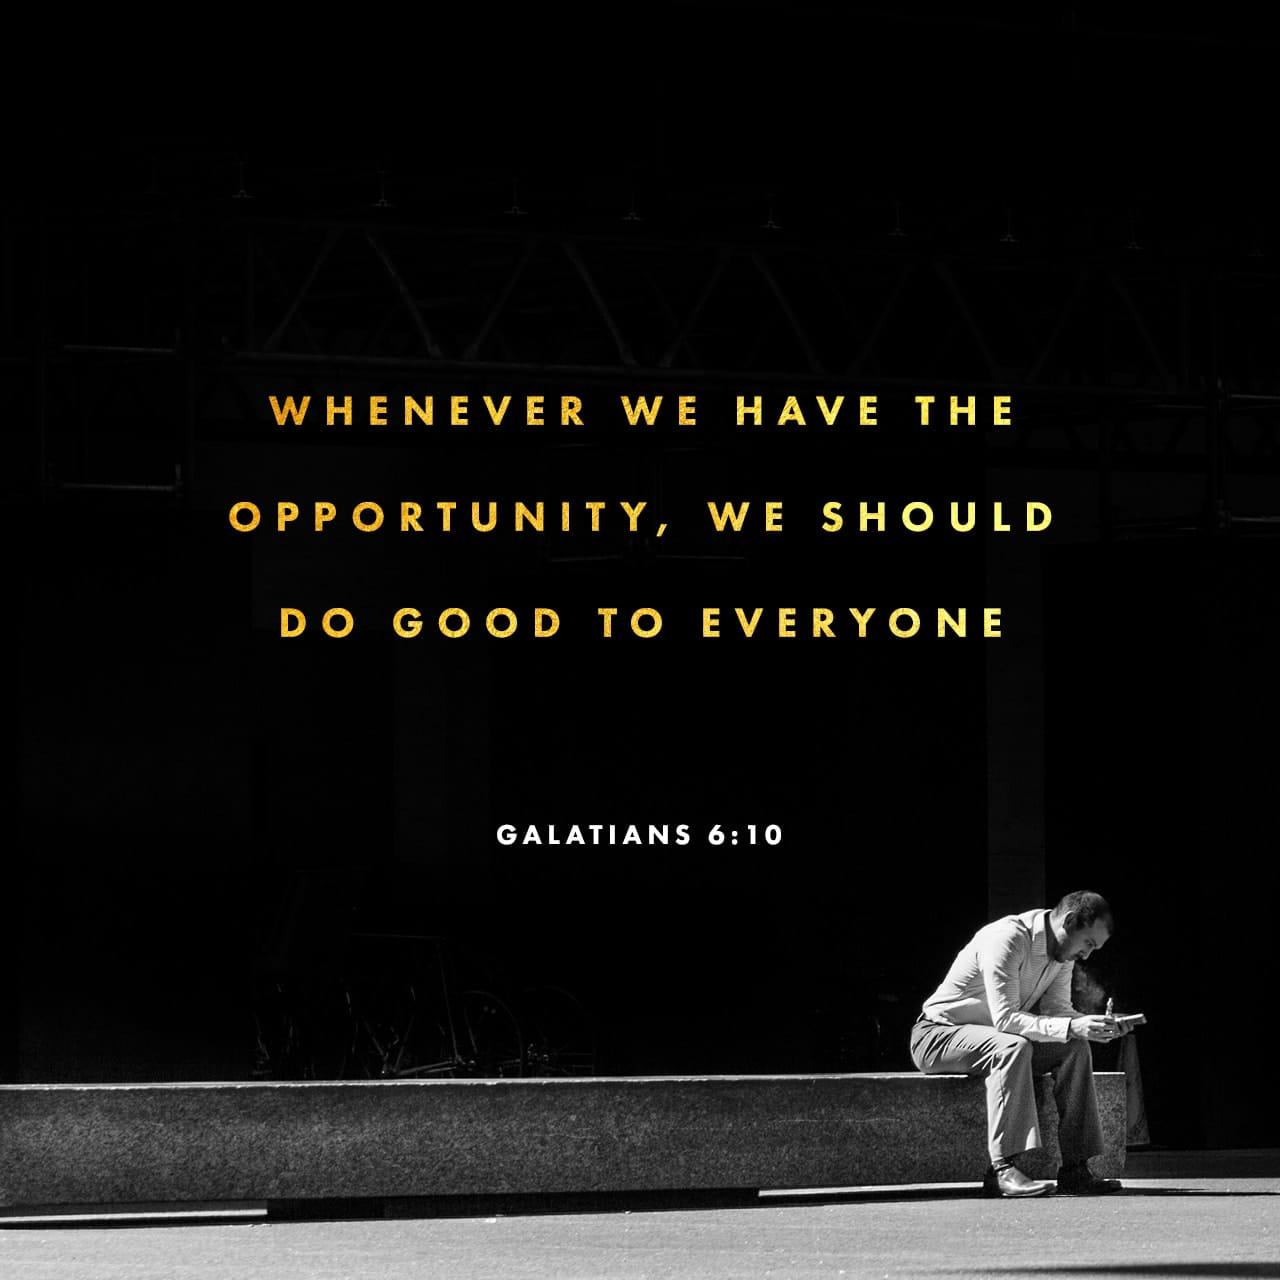 Bible Verse of the Day - day 87 - image 1762 (Galatians 6:10)